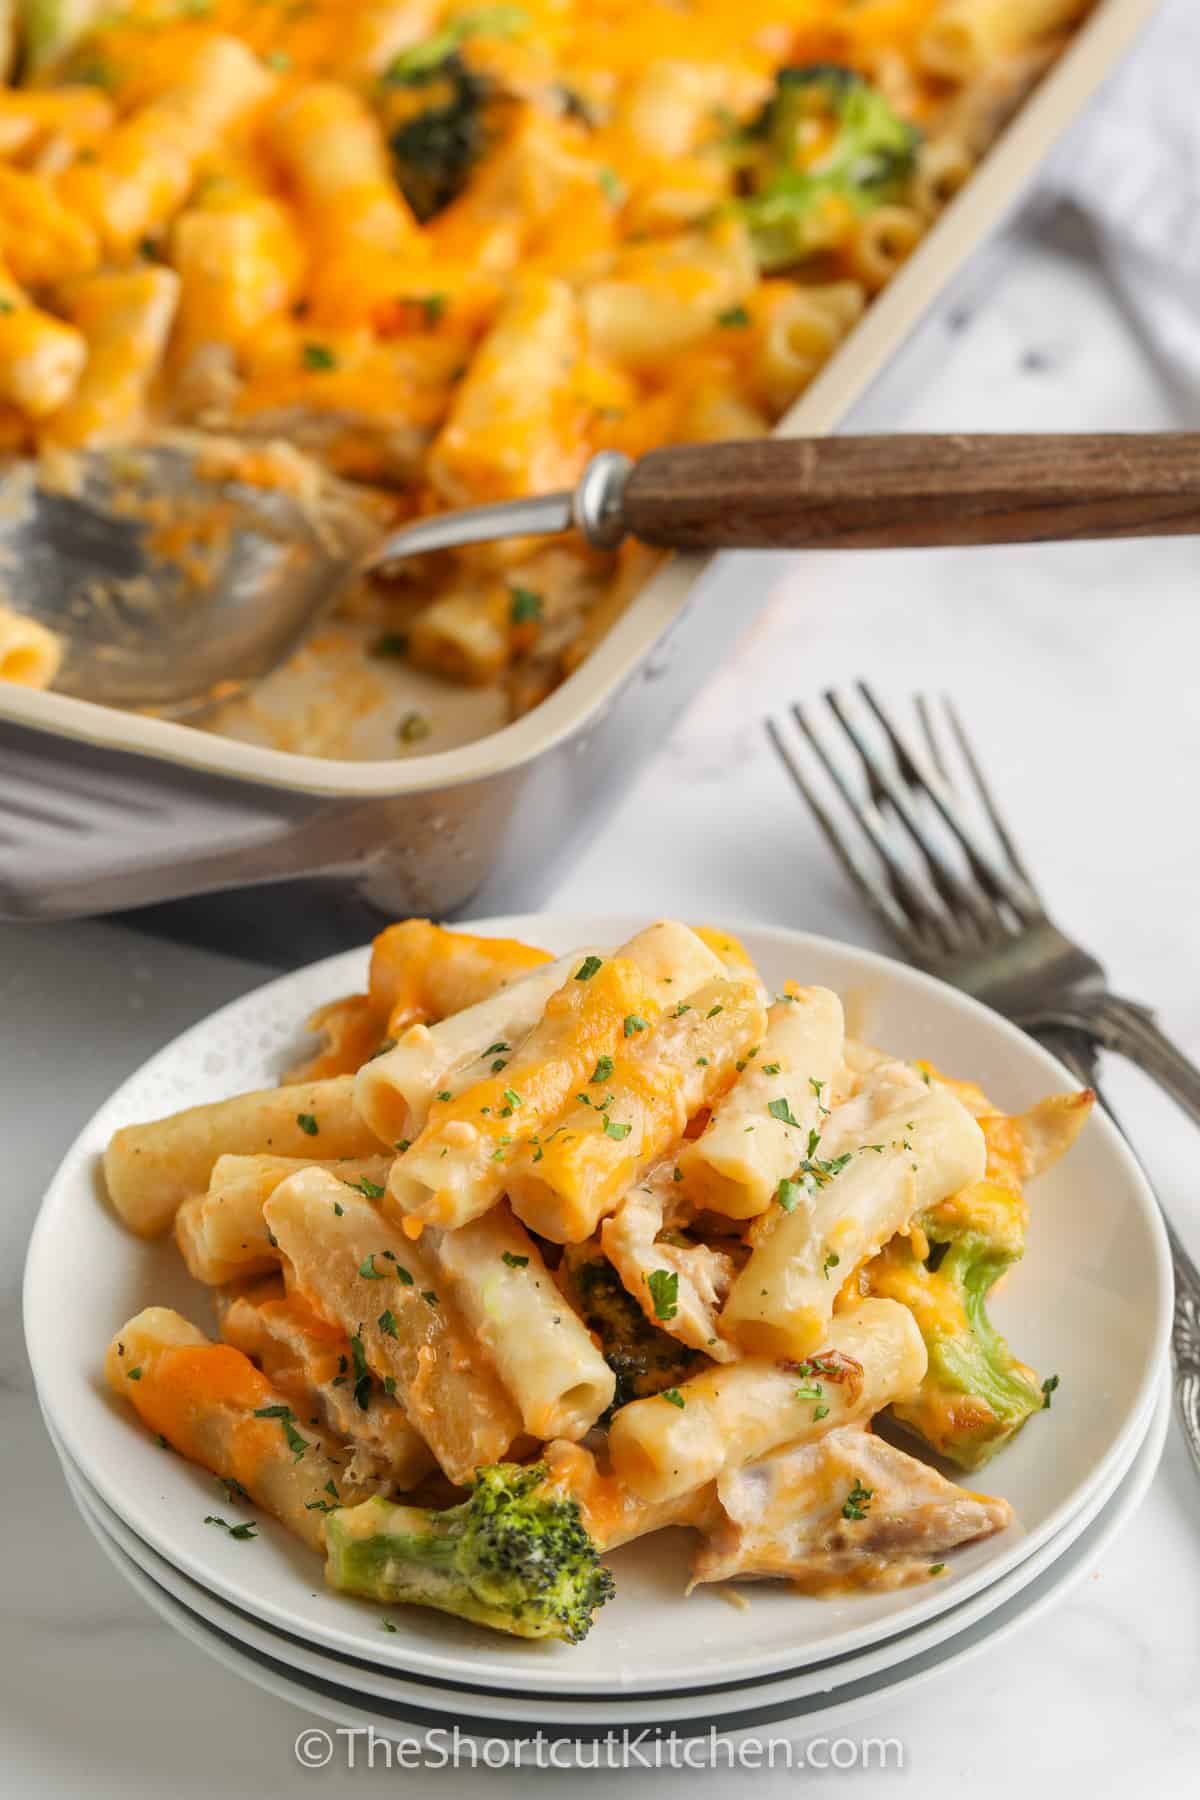 A serving of Chicken Broccoli Ziti on a plate